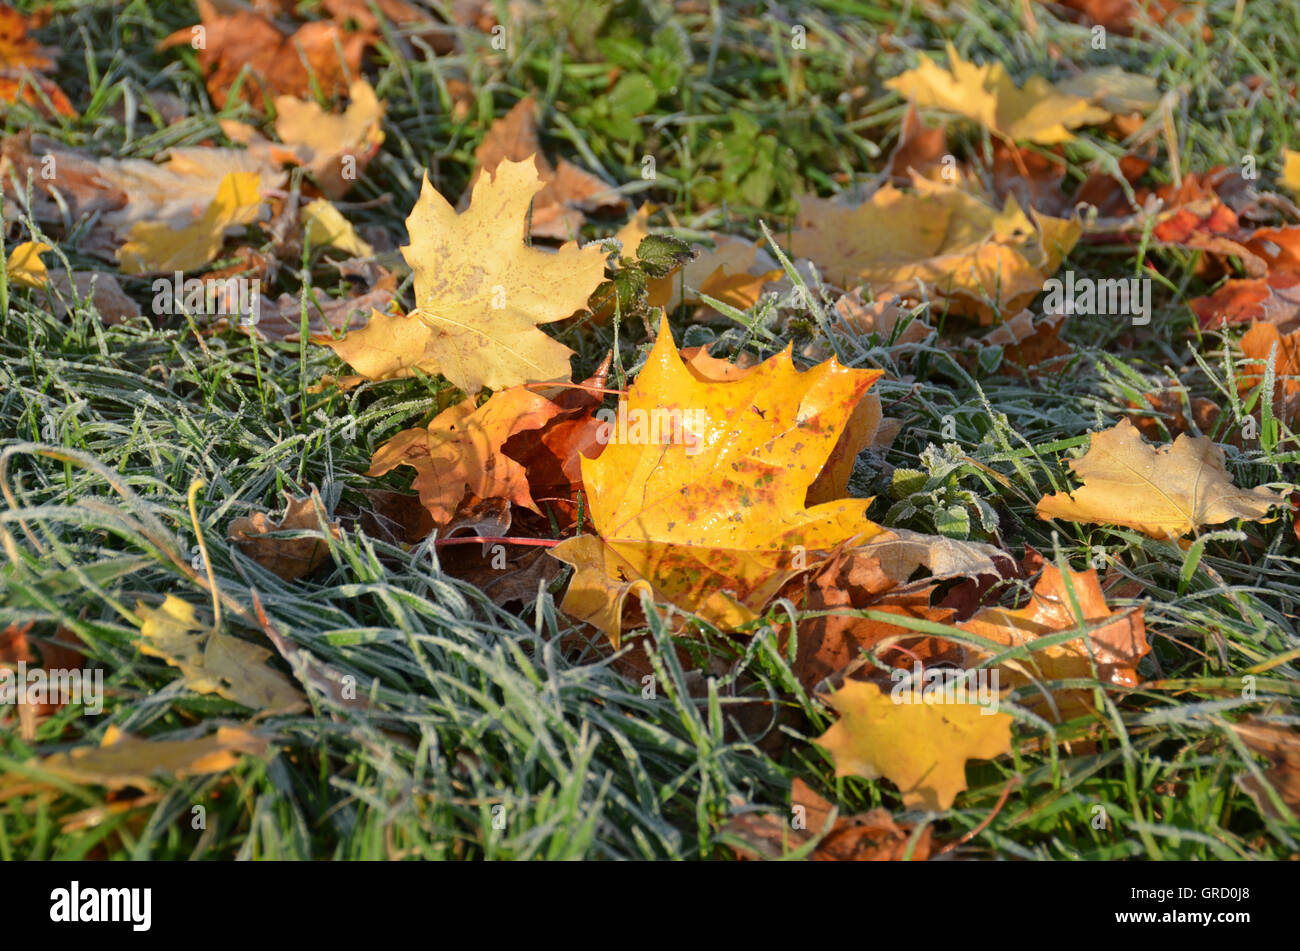 Yellow Autumnal Foliage In Frosty Grass, Maple Leaves Stock Photo